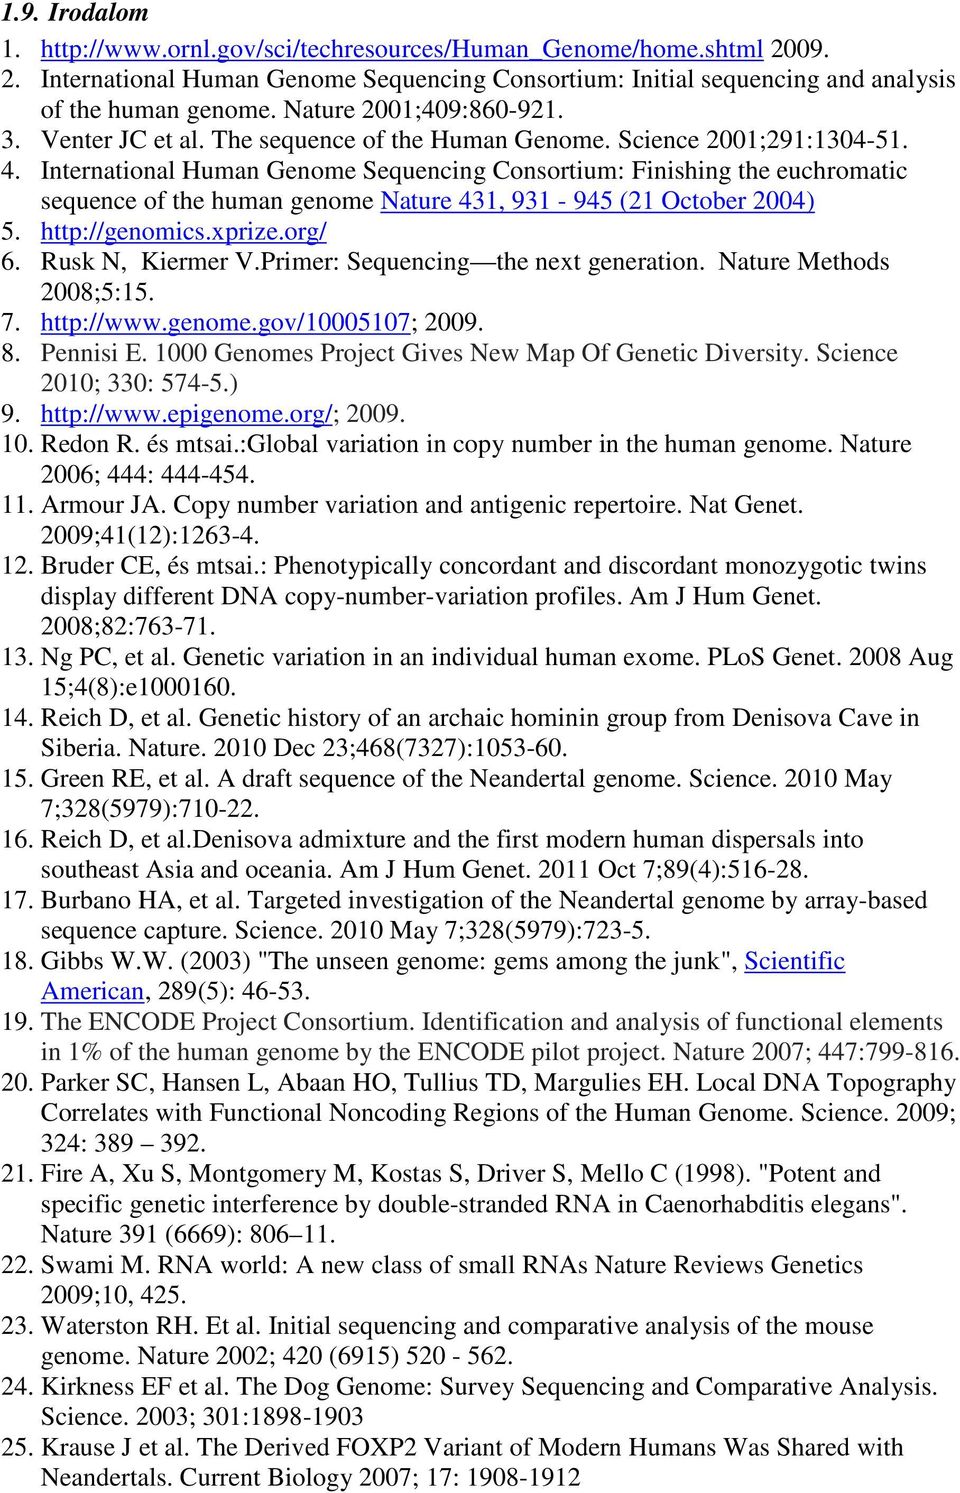 International Human Genome Sequencing Consortium: Finishing the euchromatic sequence of the human genome Nature 431, 931-945 (21 October 2004) 5. http://genomics.xprize.org/ 6. Rusk N, Kiermer V.